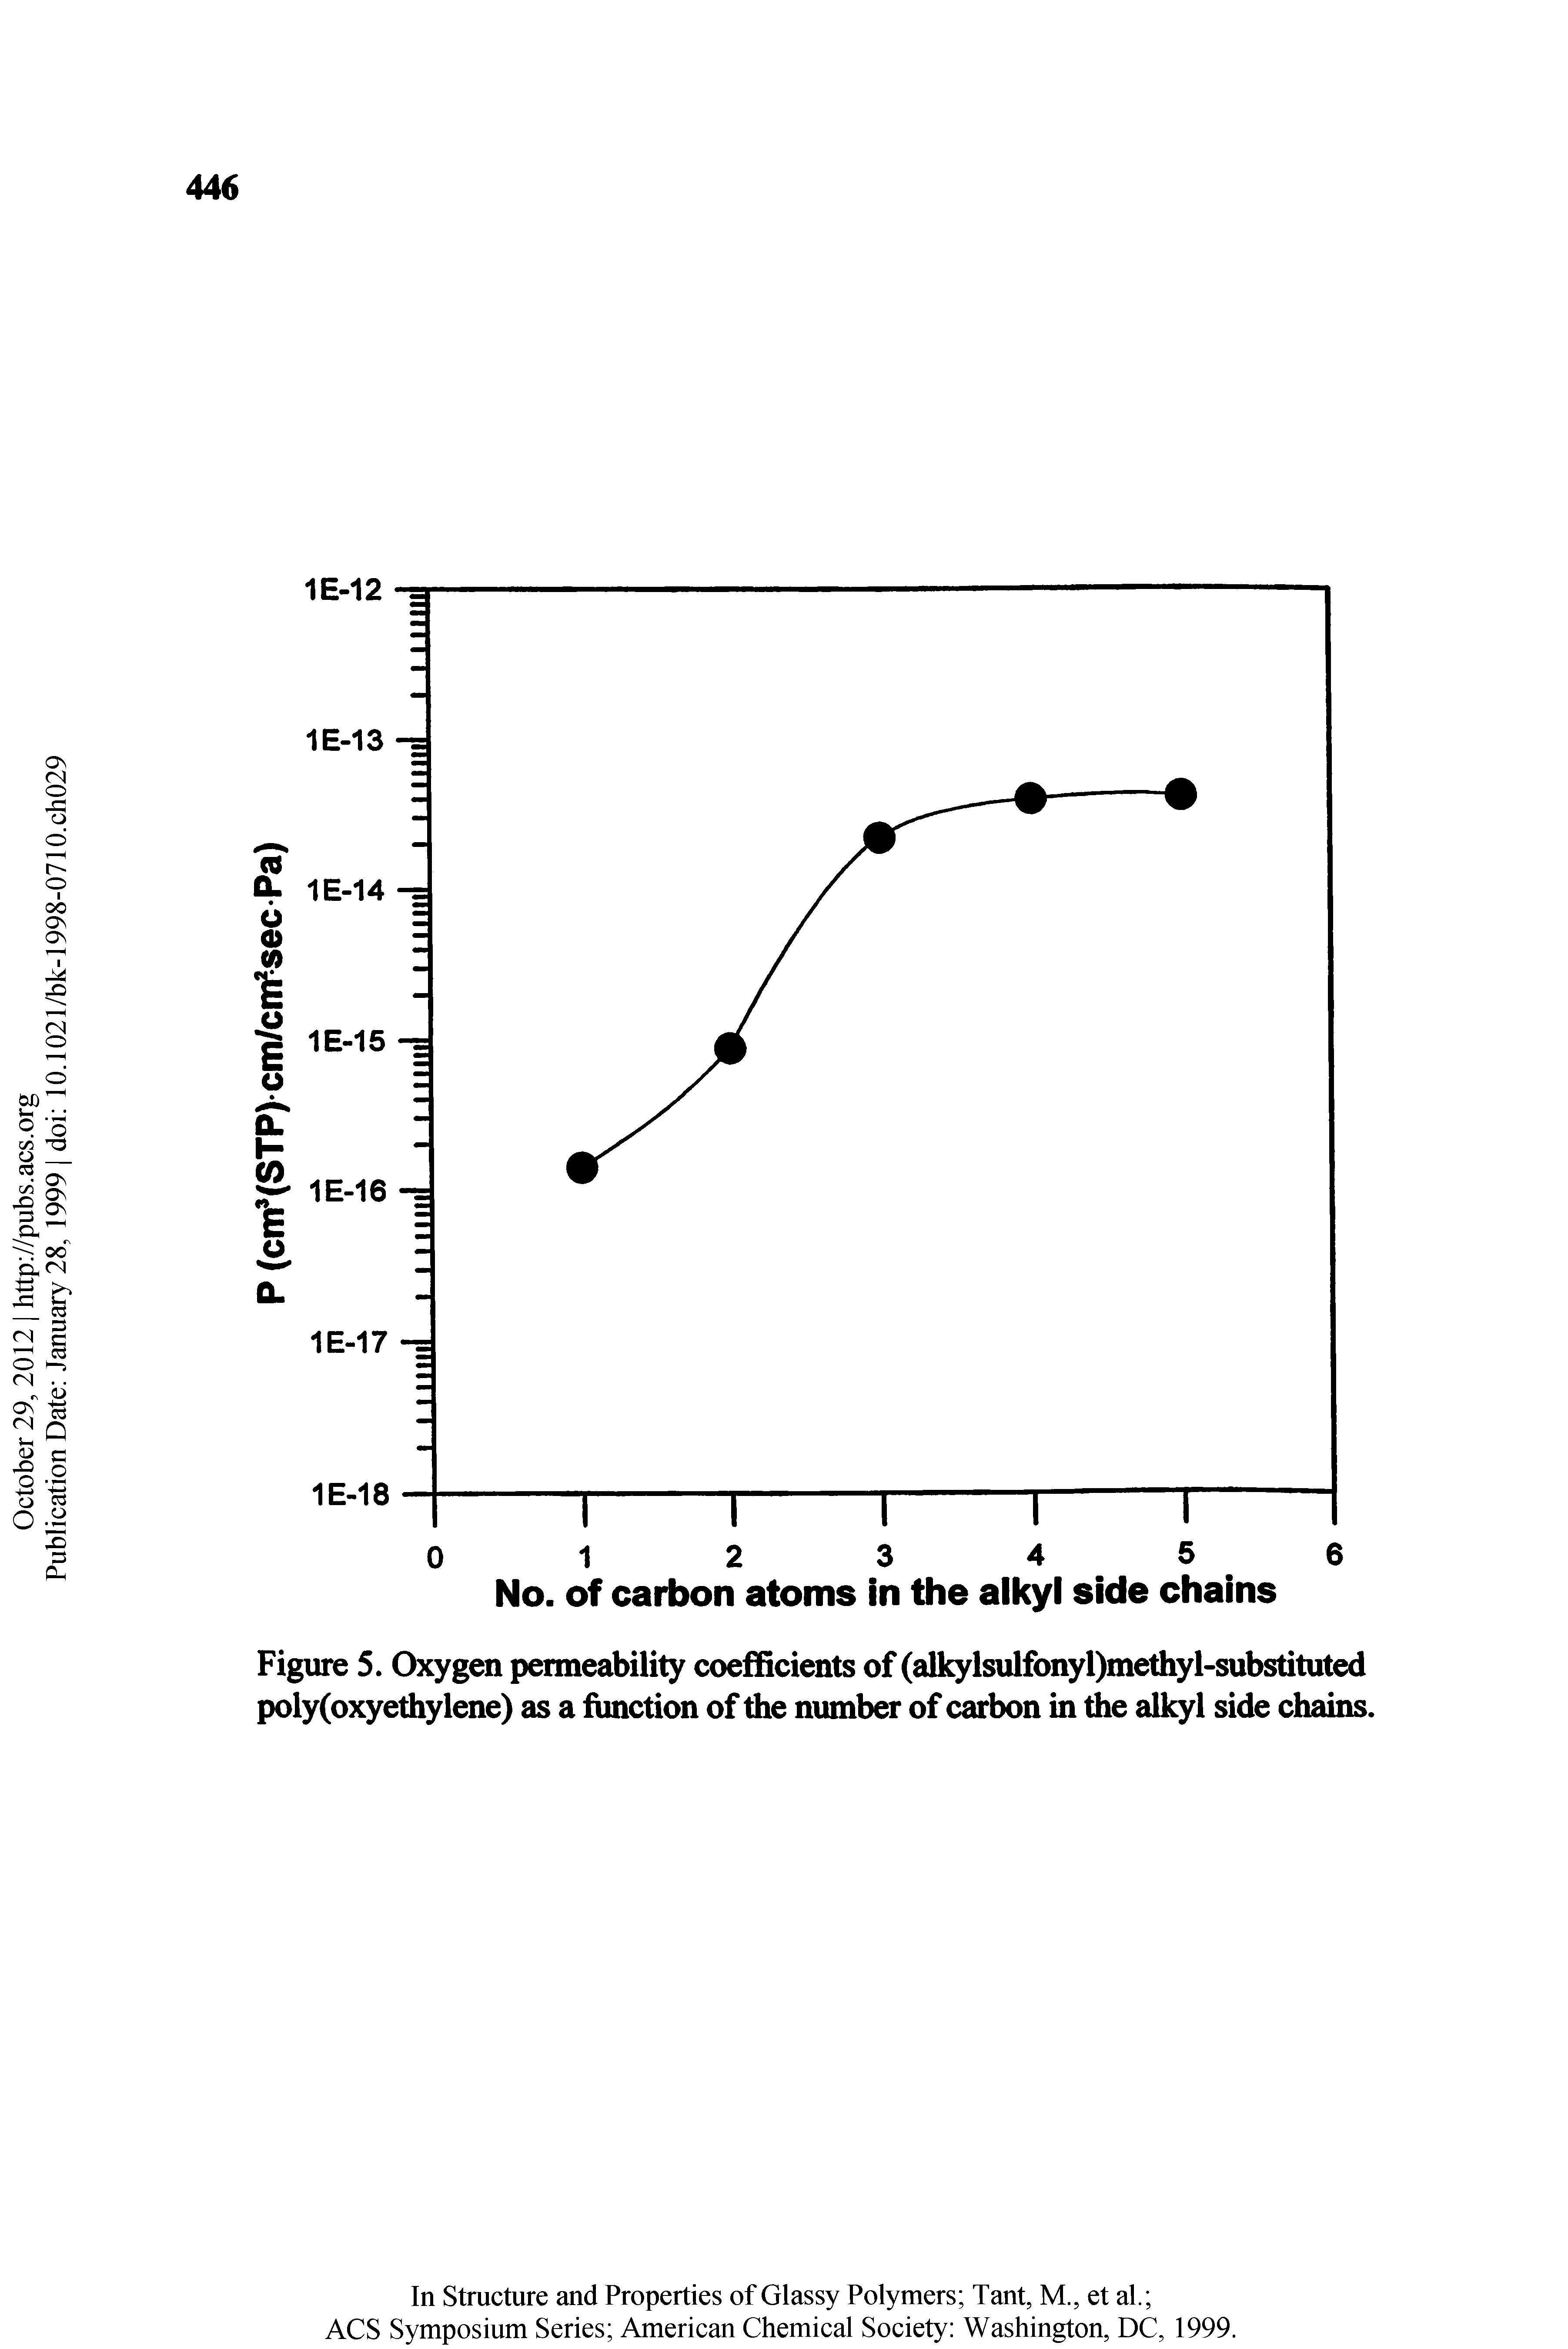 Figure 5. Oxygen permeability coefficients of (alkylsulfonyl)methyl-substituted poly(oxyethylene) as a function of the number of carbon in the alkyl side chains.